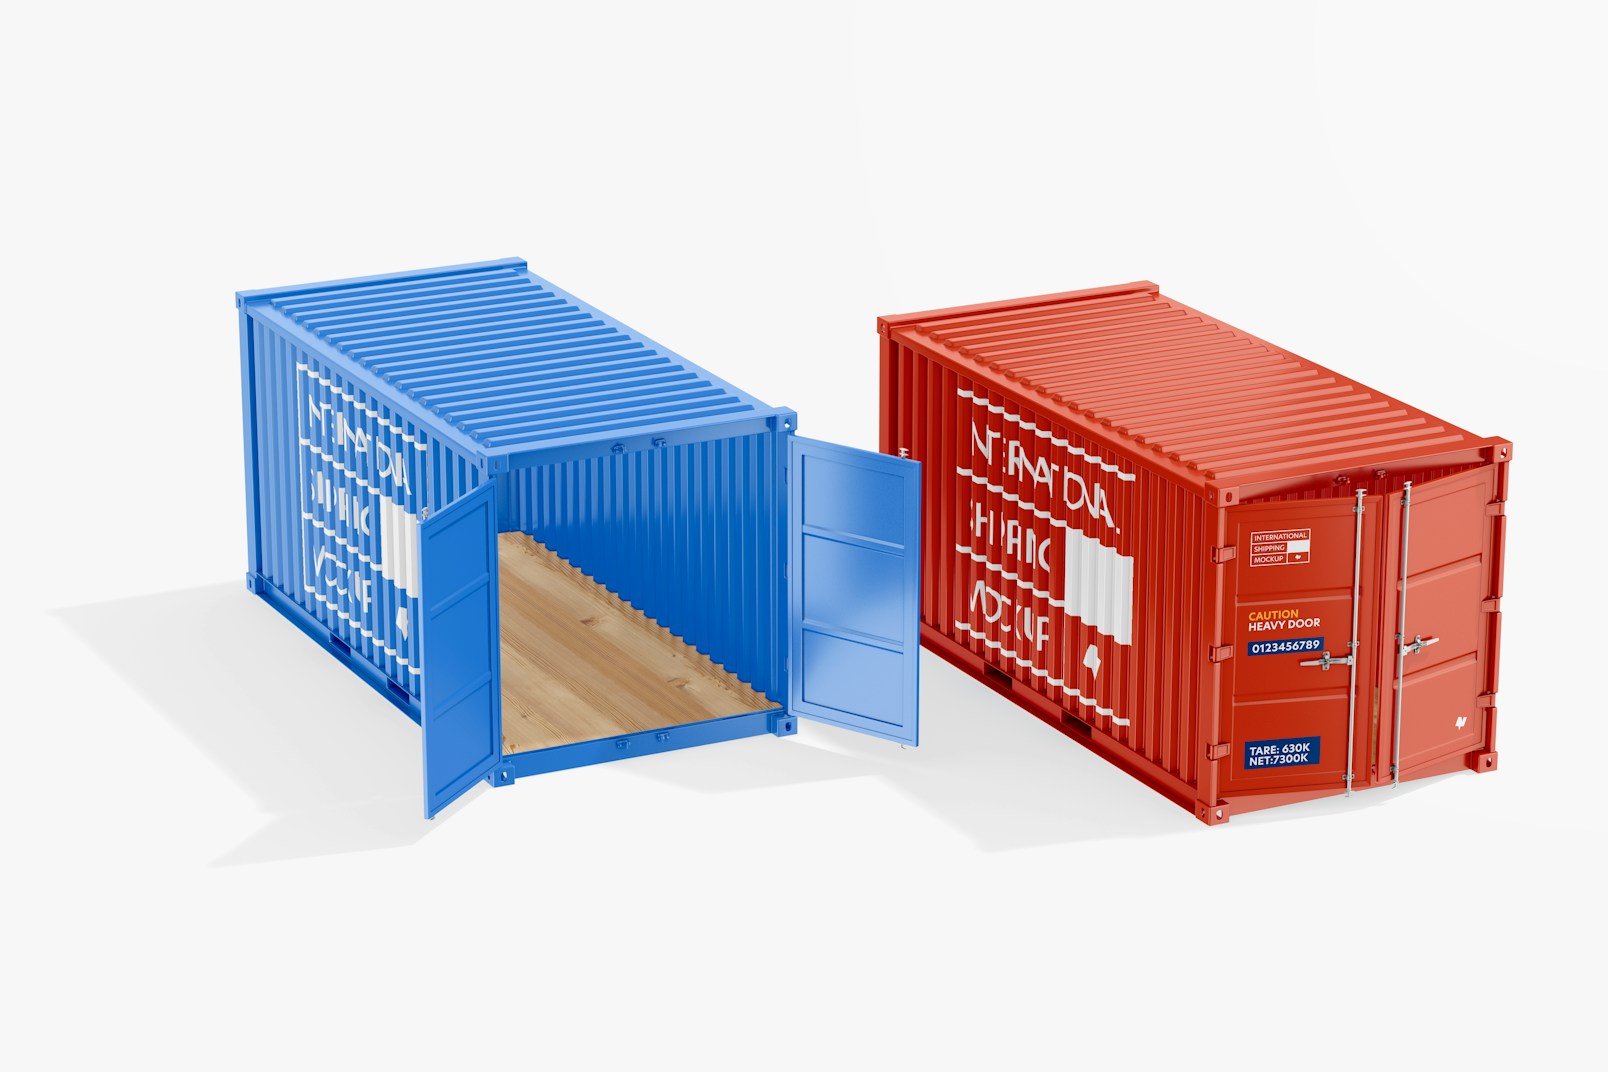 Long Shipping Containers Mockup, Opened and Closed